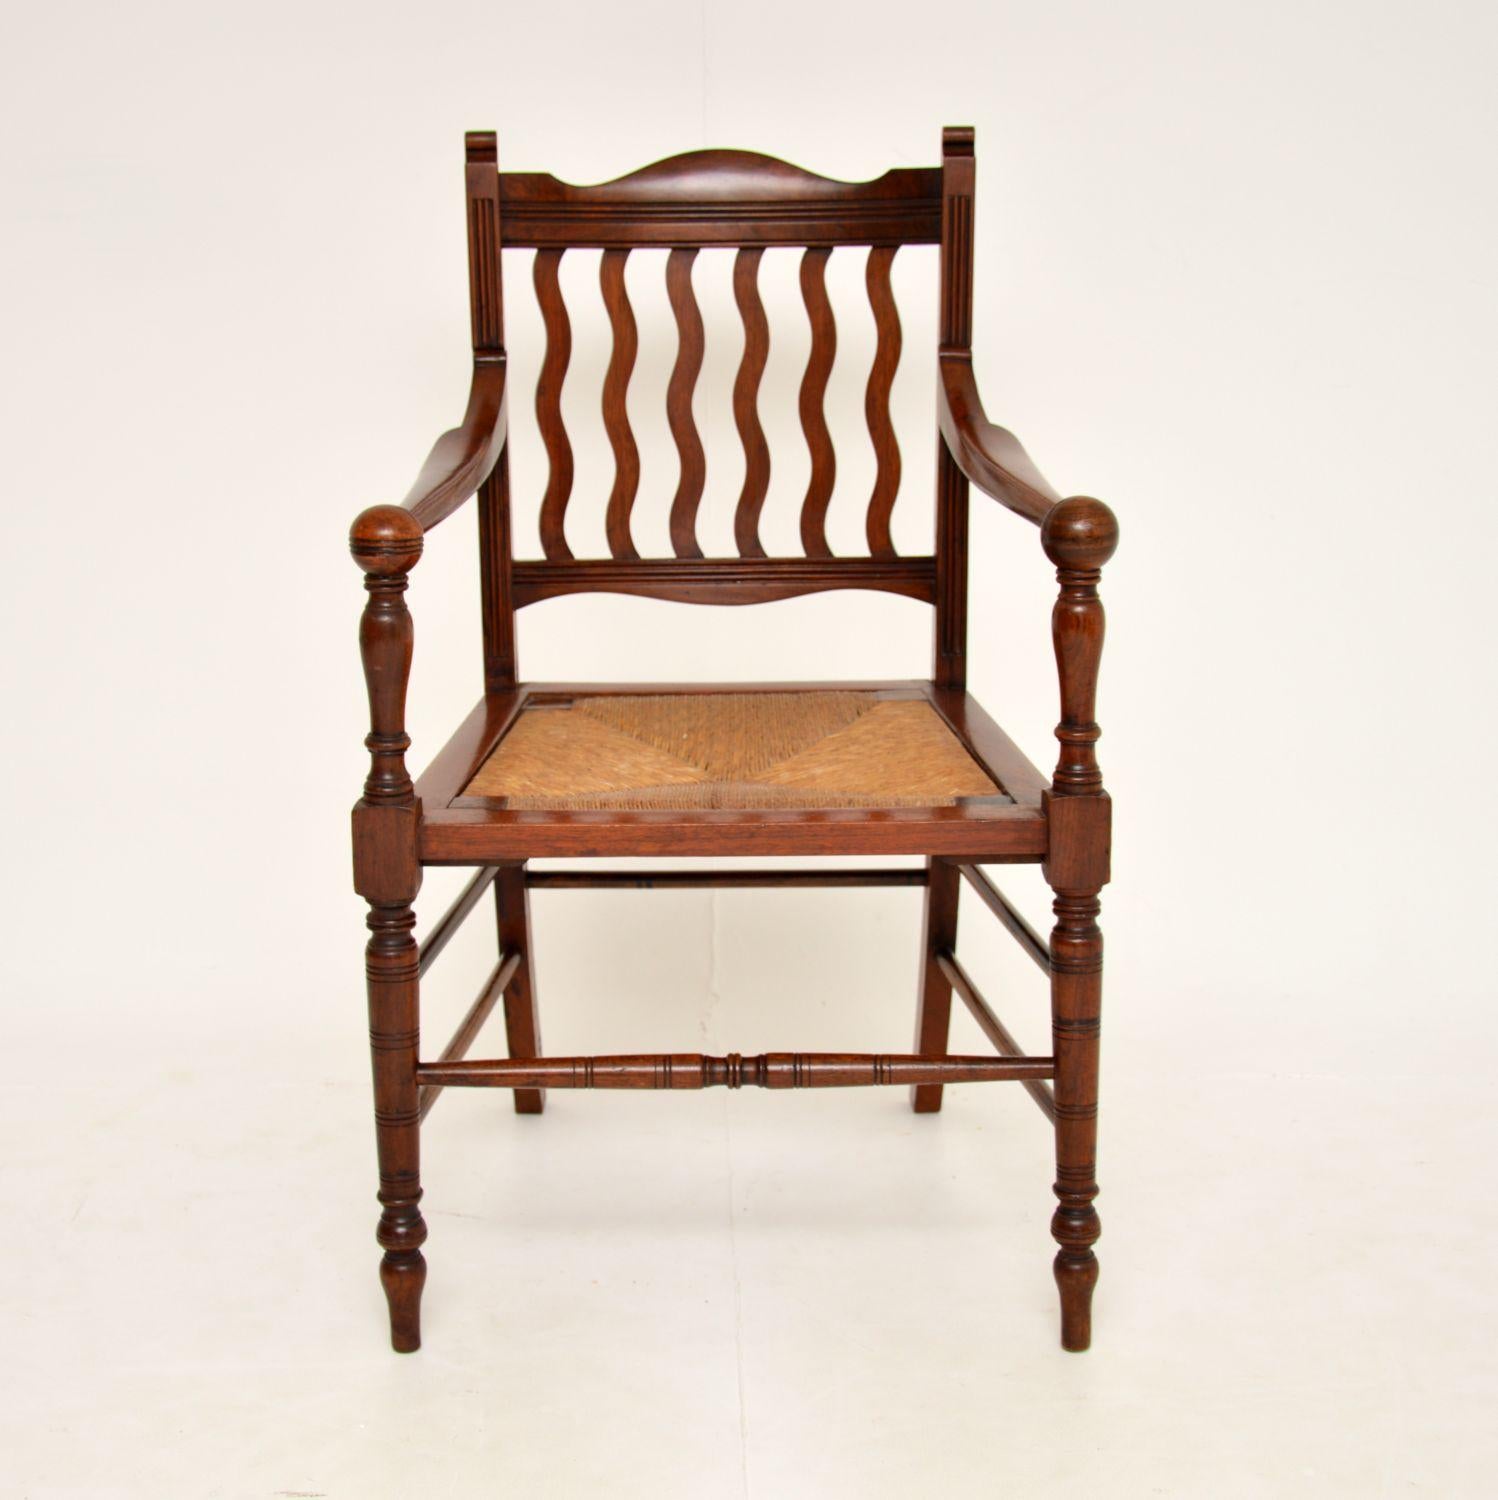 A beautiful and elegant antique Victorian Arts & Crafts armchair / desk chair. This was made in England, it dates from around the 1880-90’s period.

It has a beautiful design, with an amazing frame and drop in rush seat. The backs slats have an